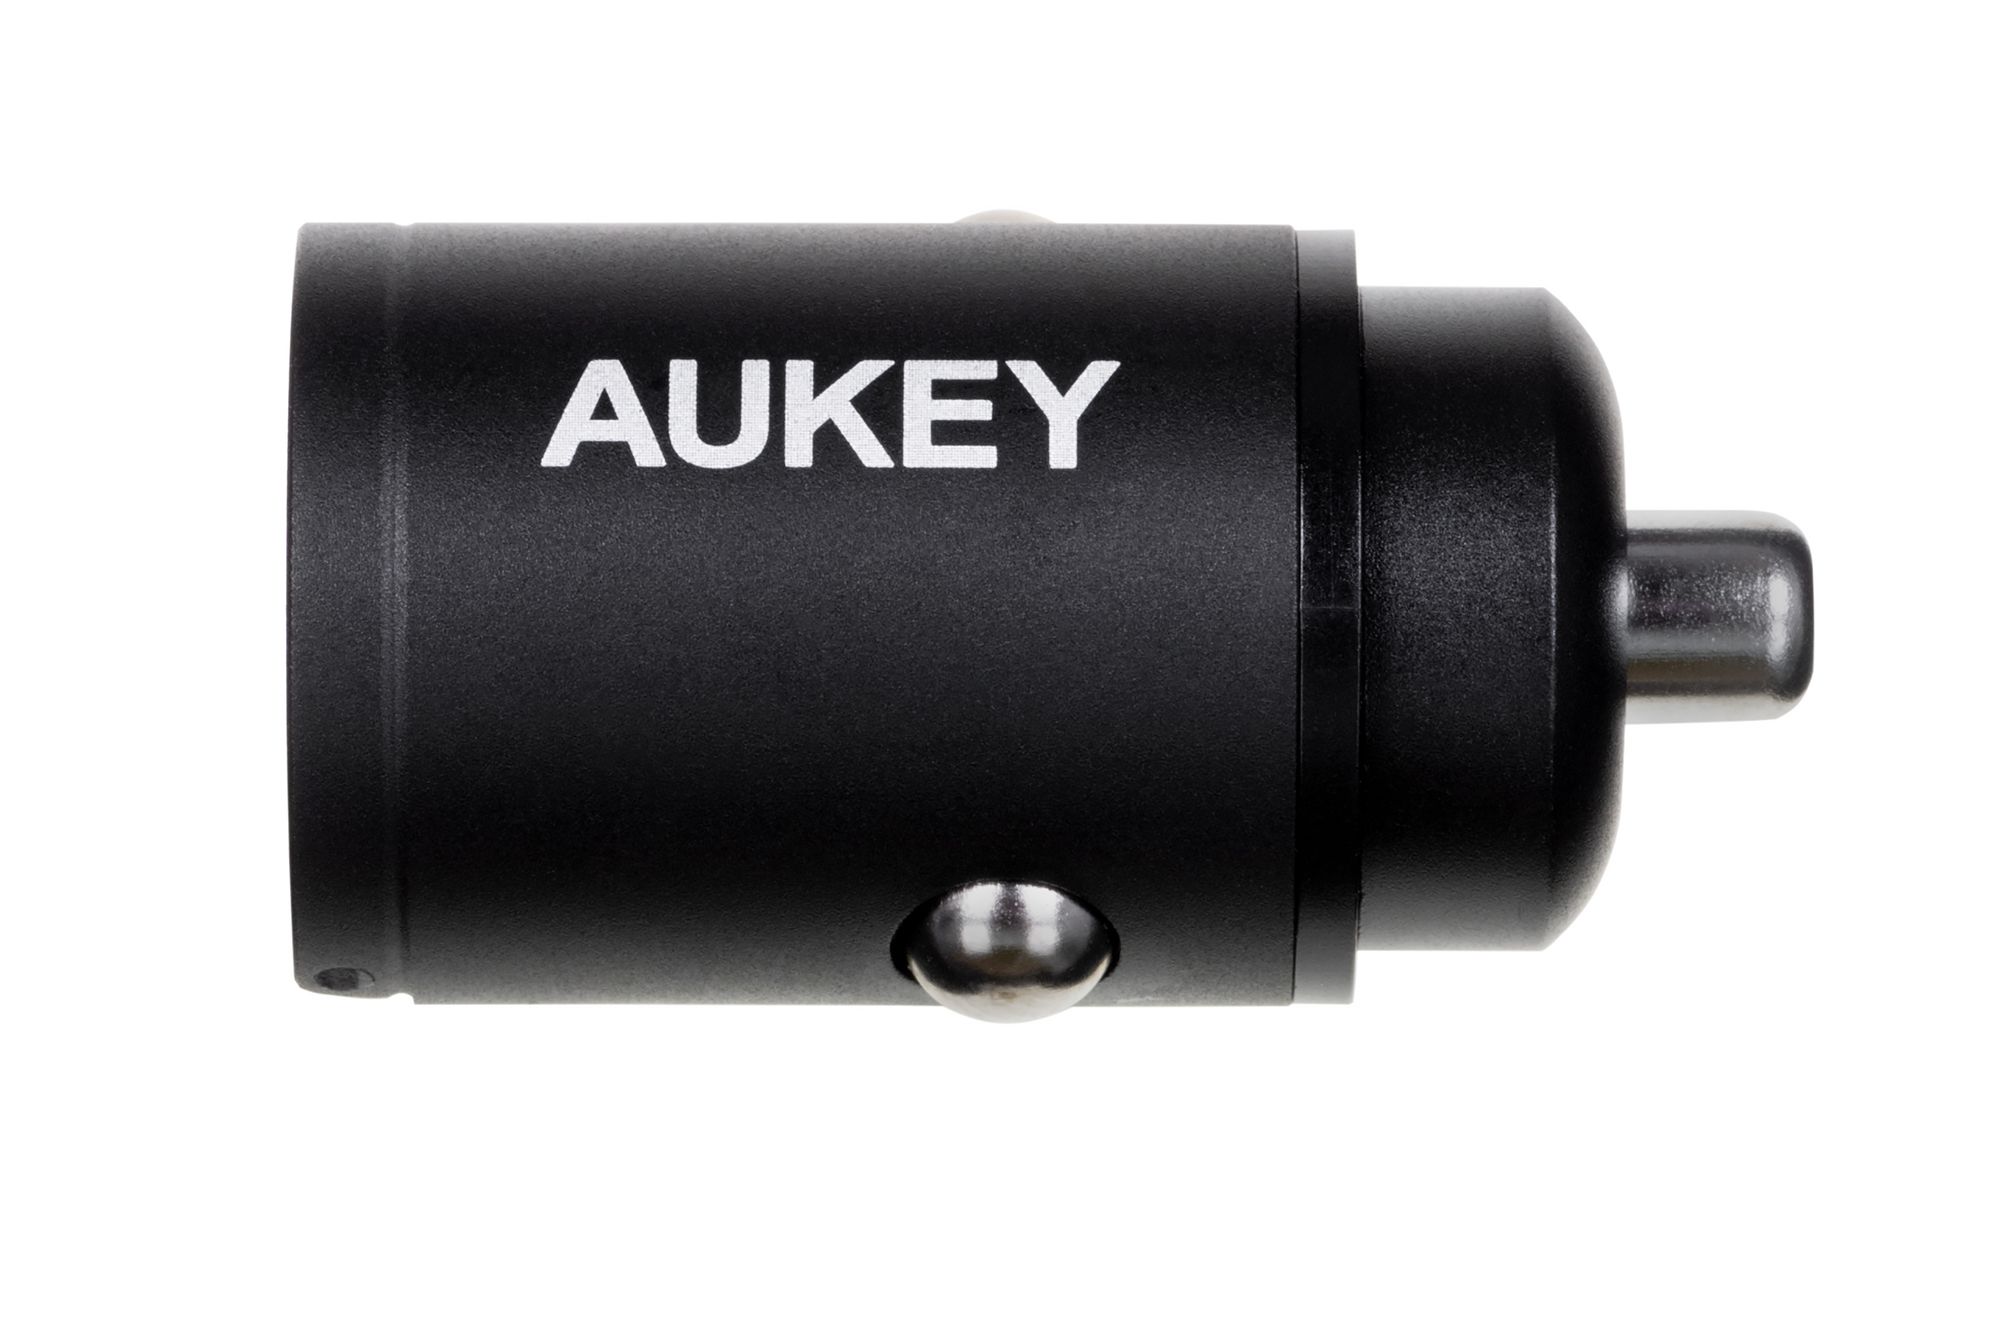 AUKEY CC-A4 mobile device charger Black Auto_2